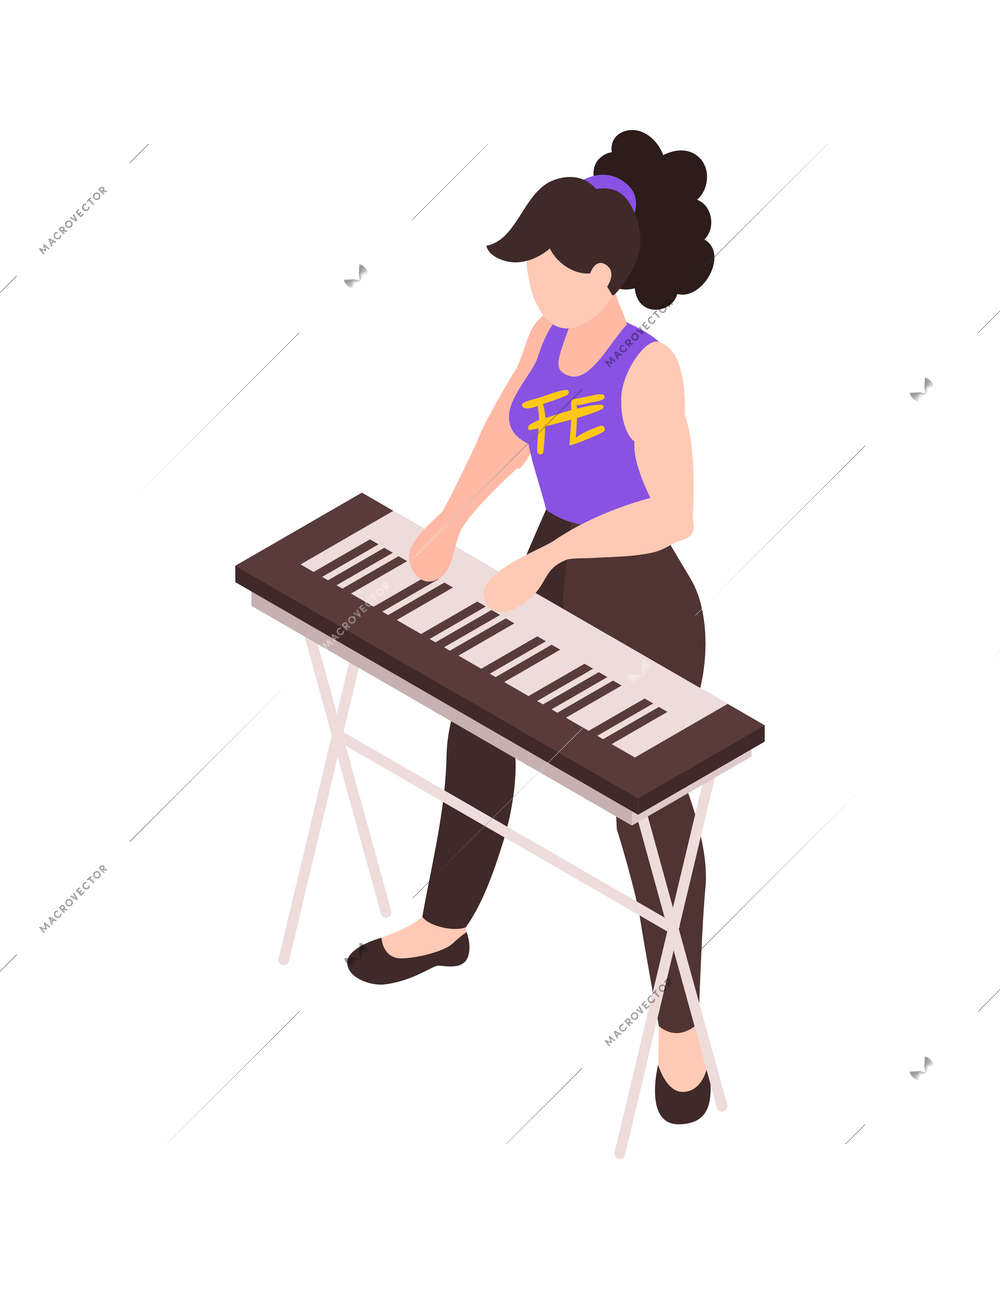 Female pop musician playing electric keyboard 3d isometric vector illustration